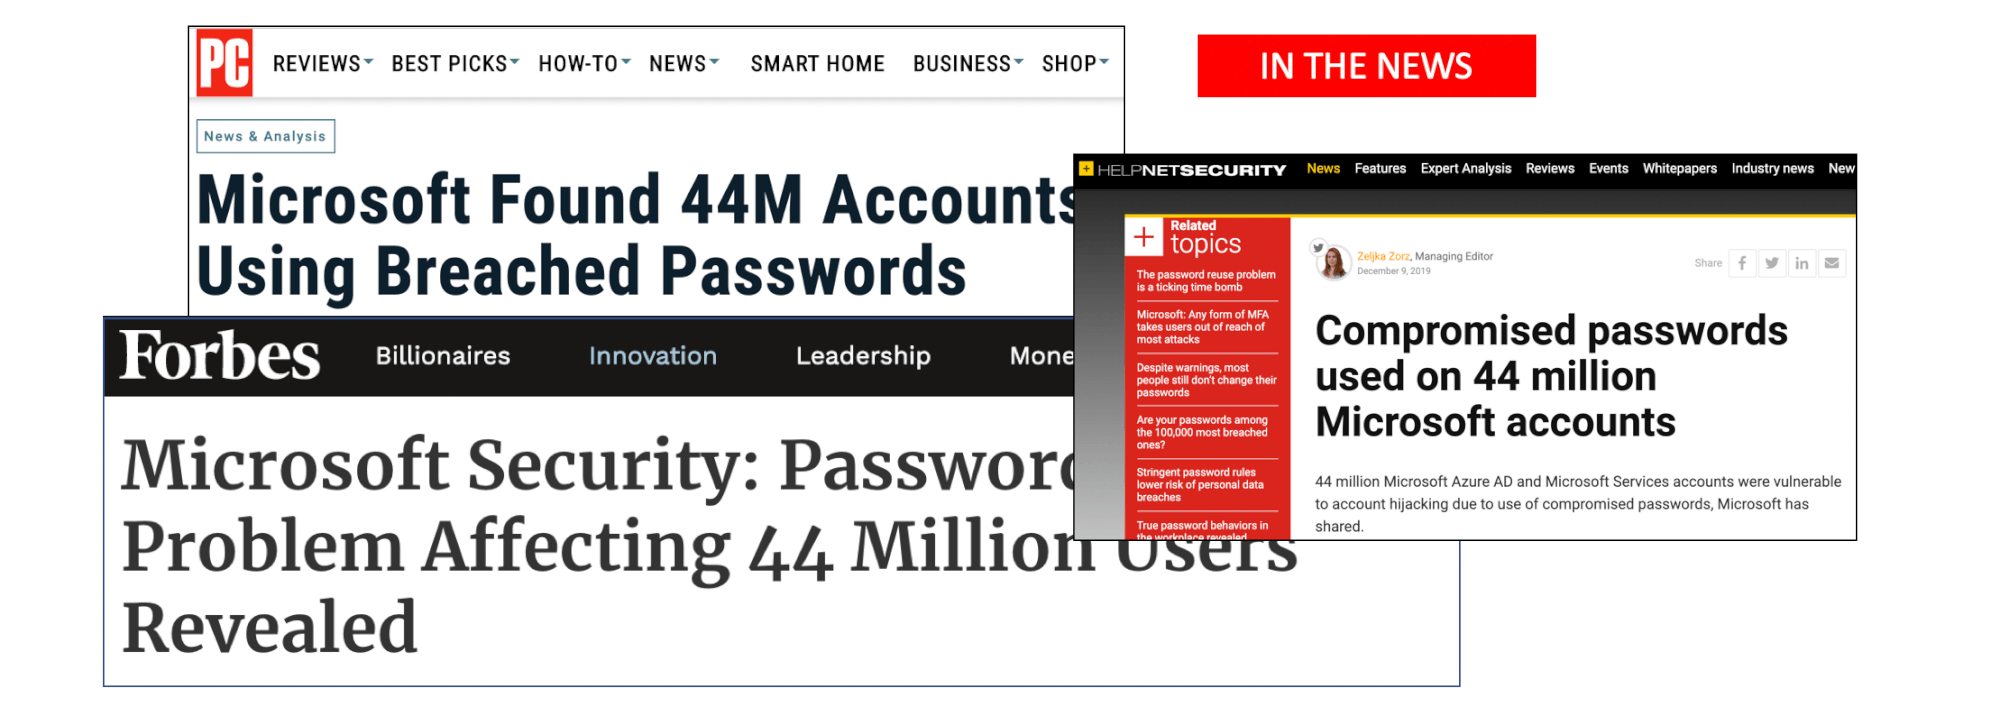 Microsoft has just announced that a staggering 44 million accounts were vulnerable to account takeover due to the use of compromised or stolen passwords